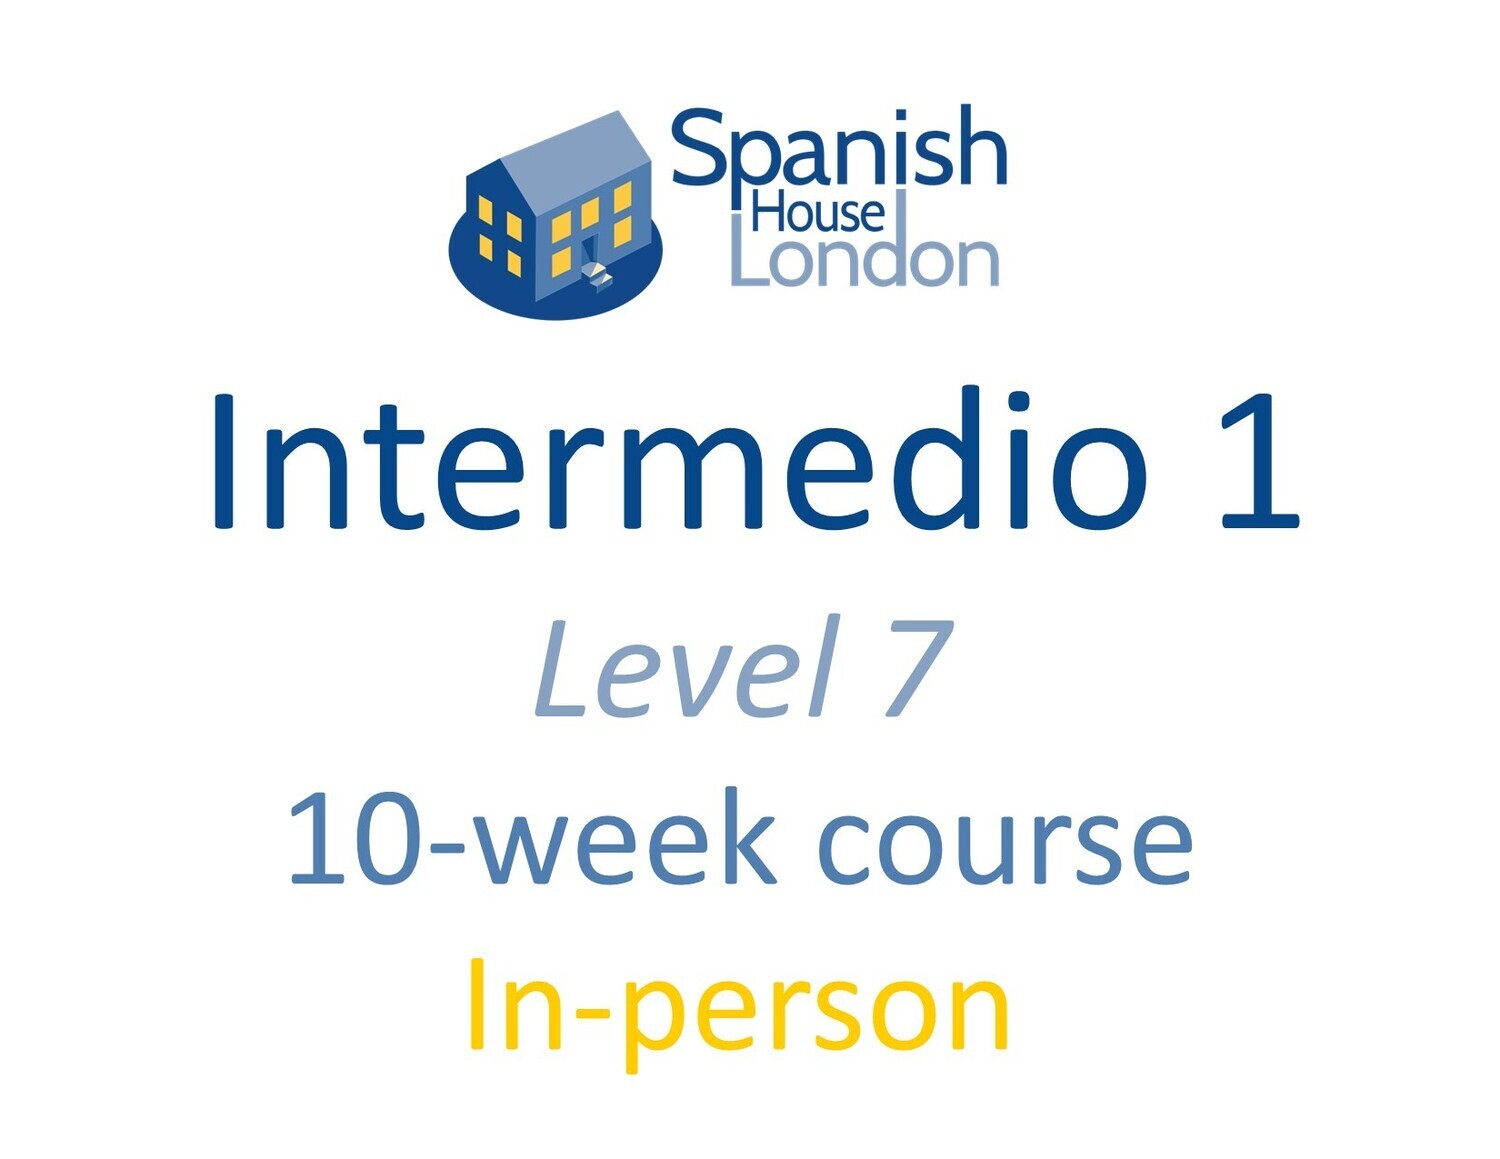 Intermedio 1 Course starting on 16th November at 7.30pm in Euston / King's Cross